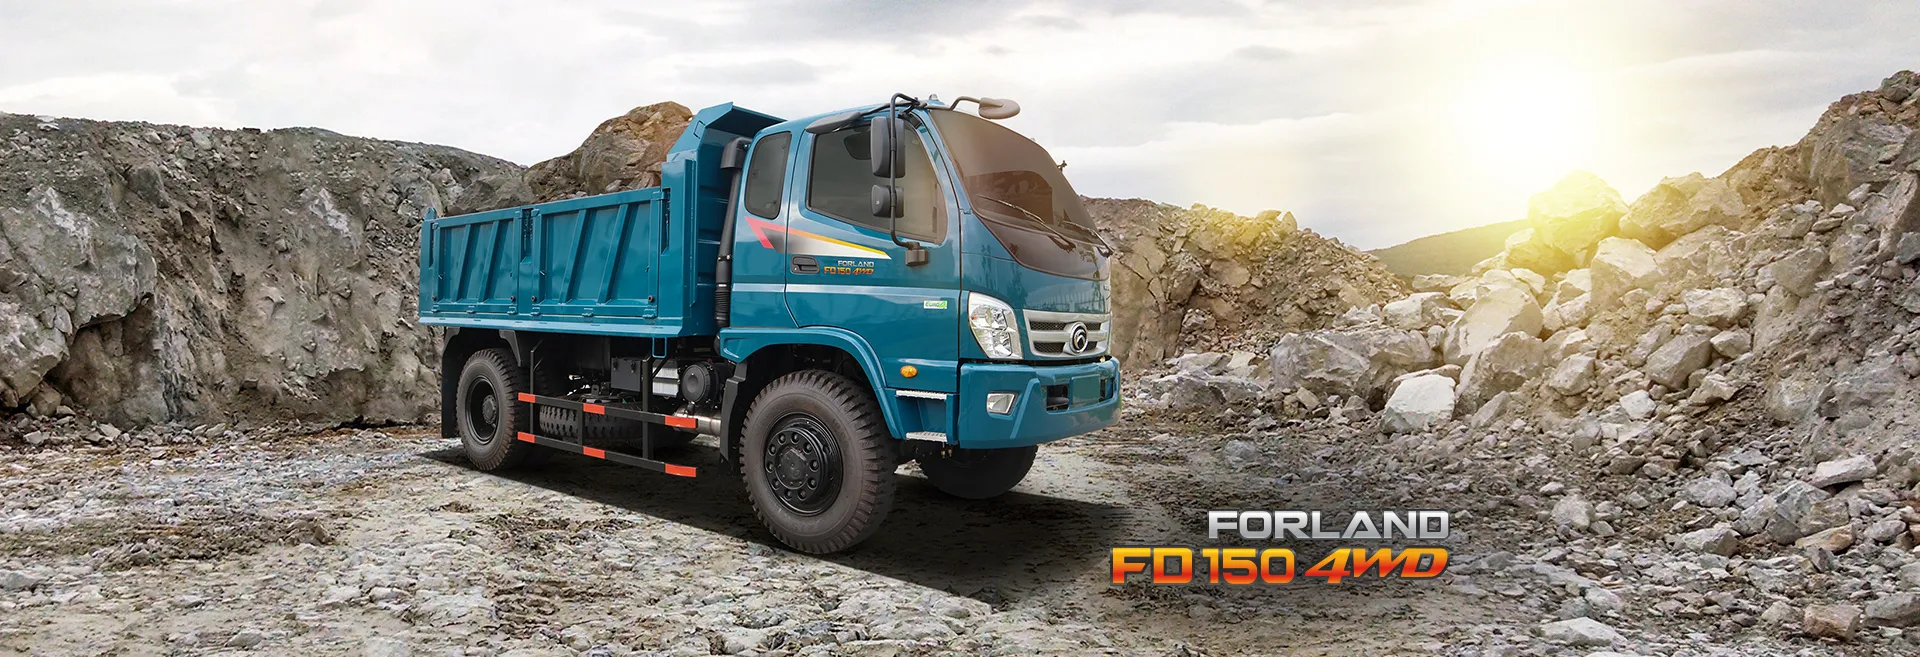 Forland FD150 - 4WD